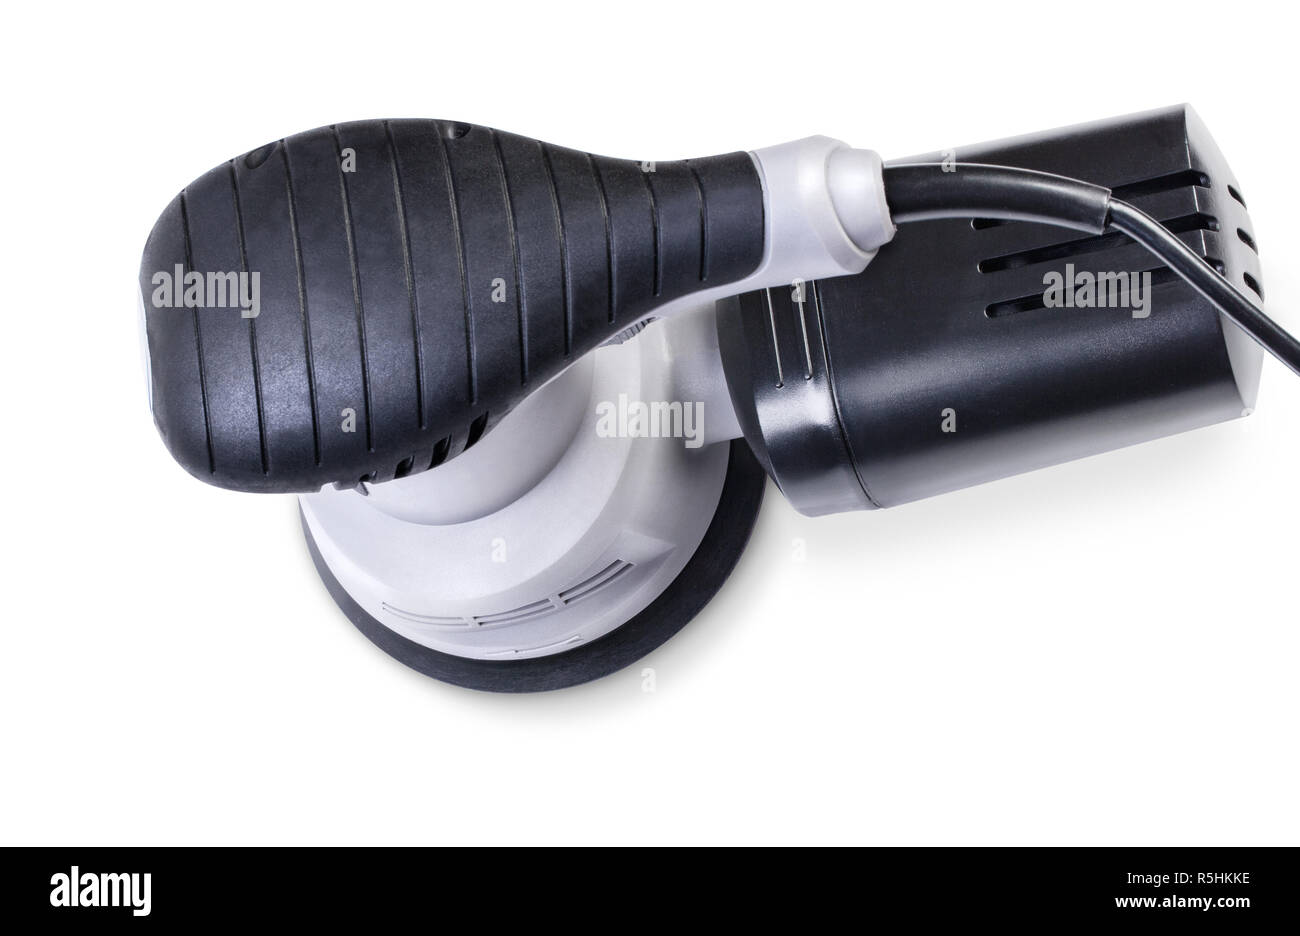 Electric manual circular gray grinder isolated on white background Stock Photo